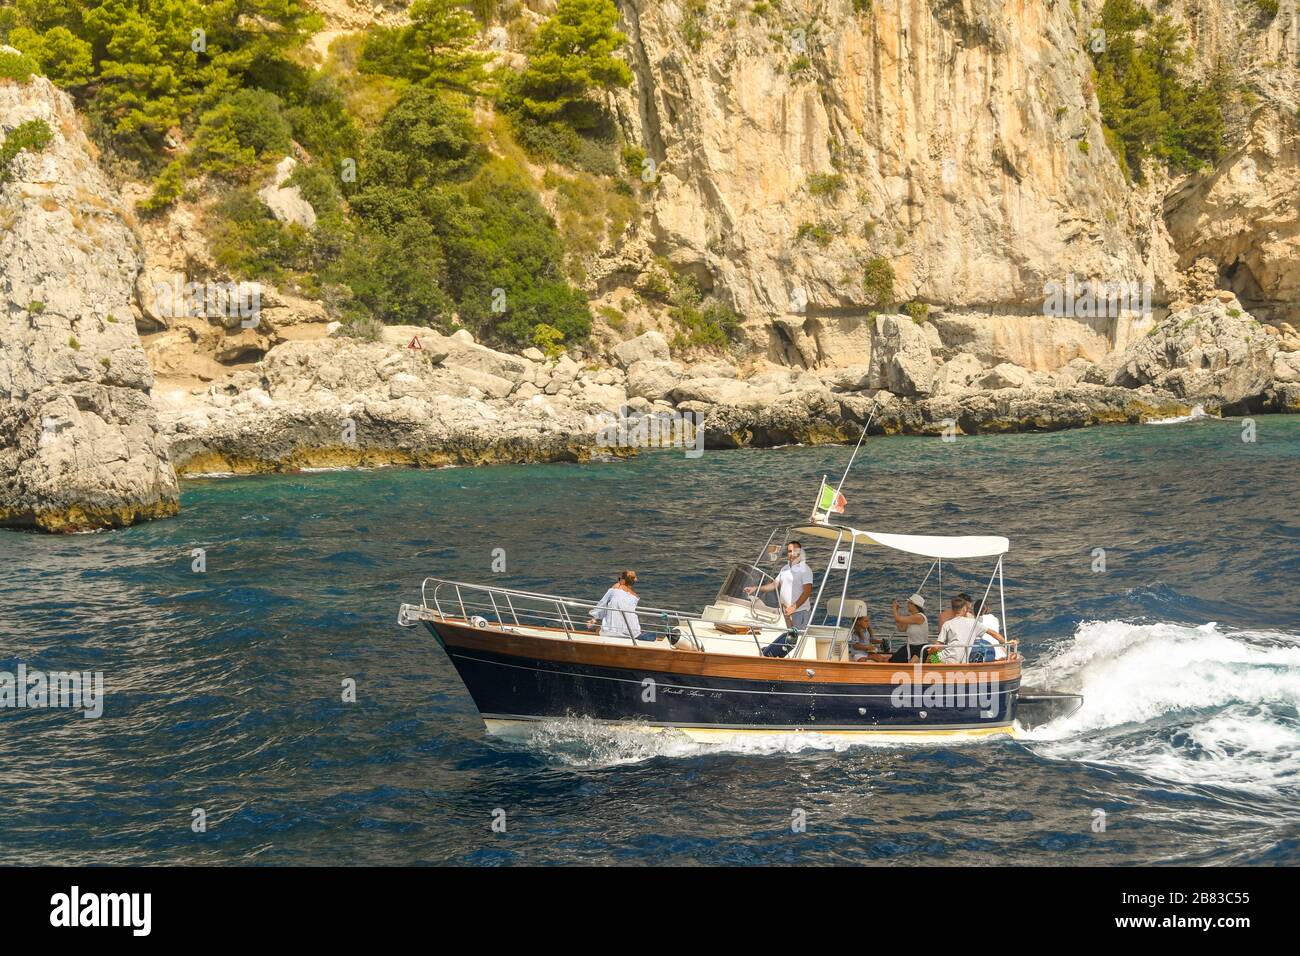 ISLE OF CAPRI, ITALY - AUGUST 2019: People on board a small motor boat on a trip around the Isle of Capri. Stock Photo